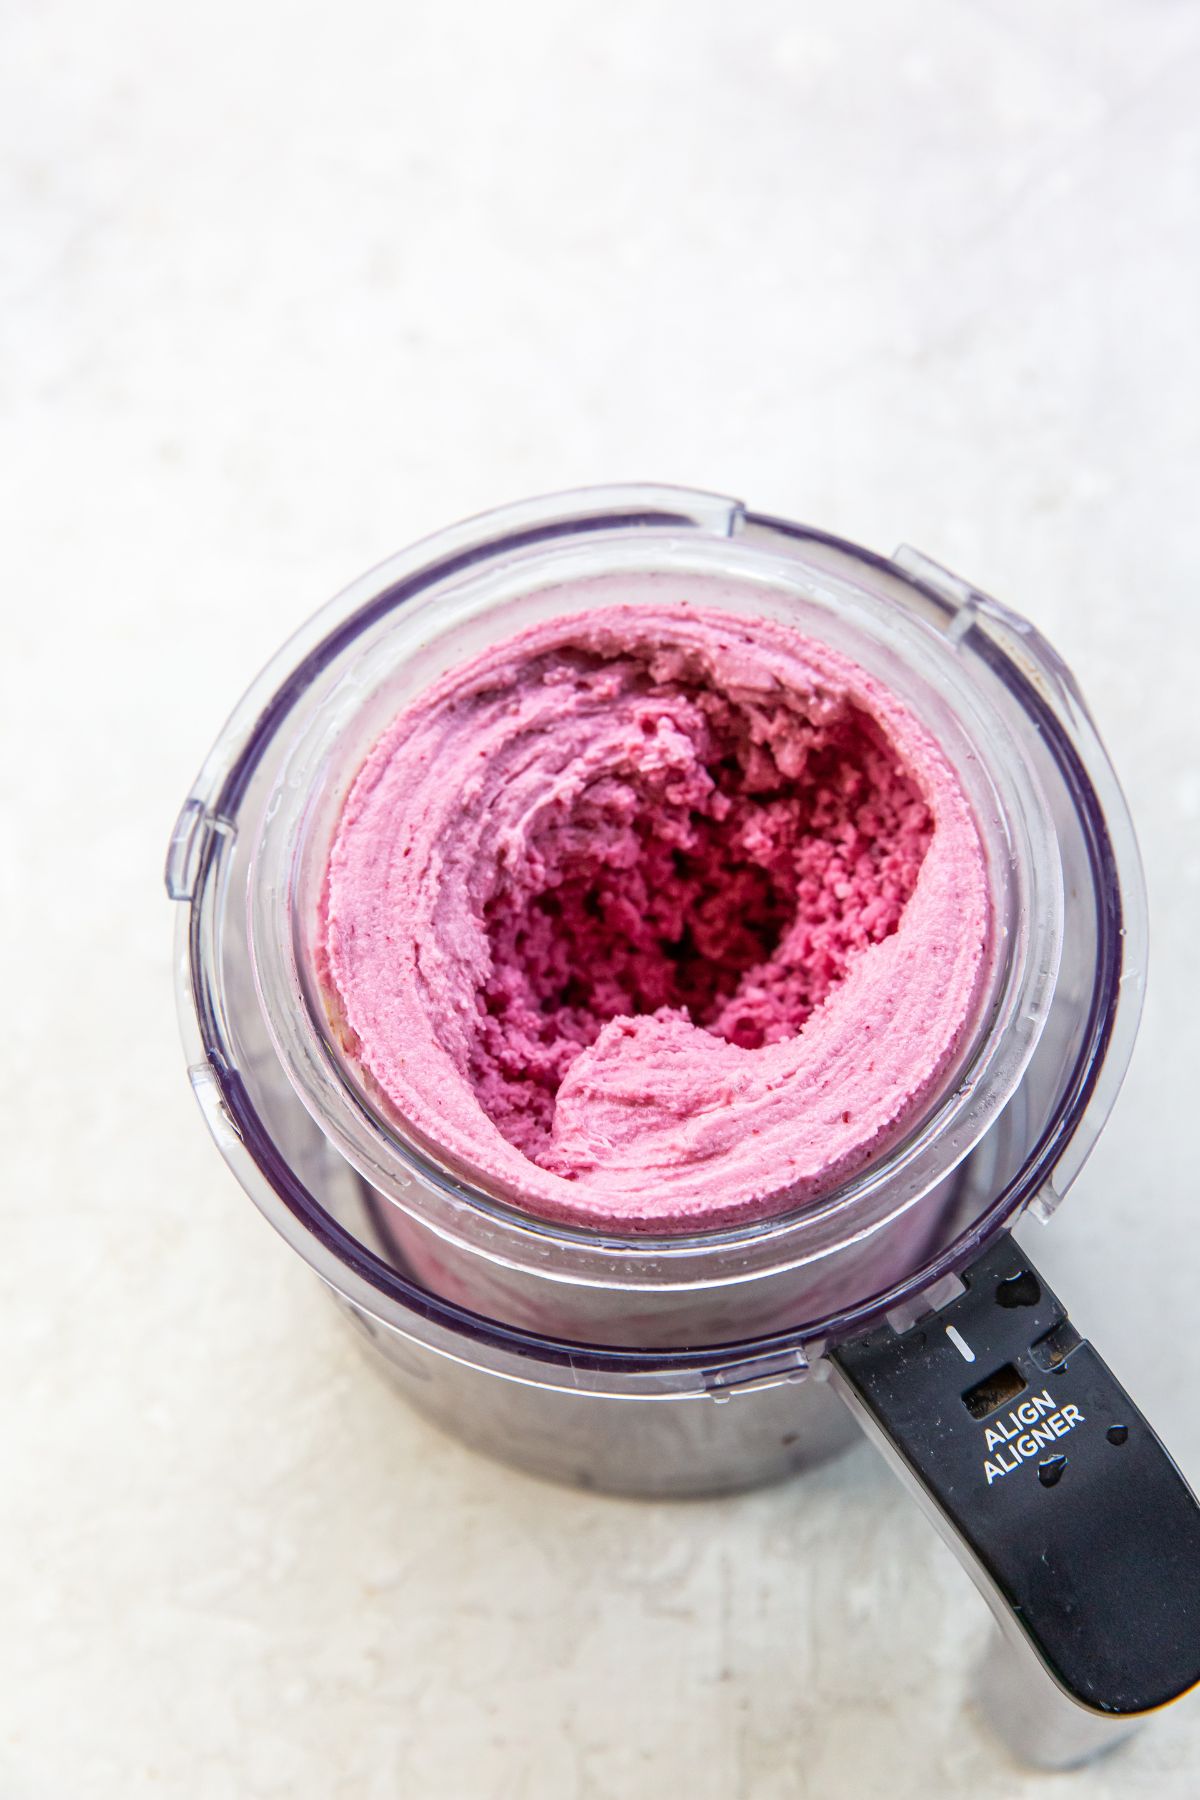 A blender filled with a pink mixture.